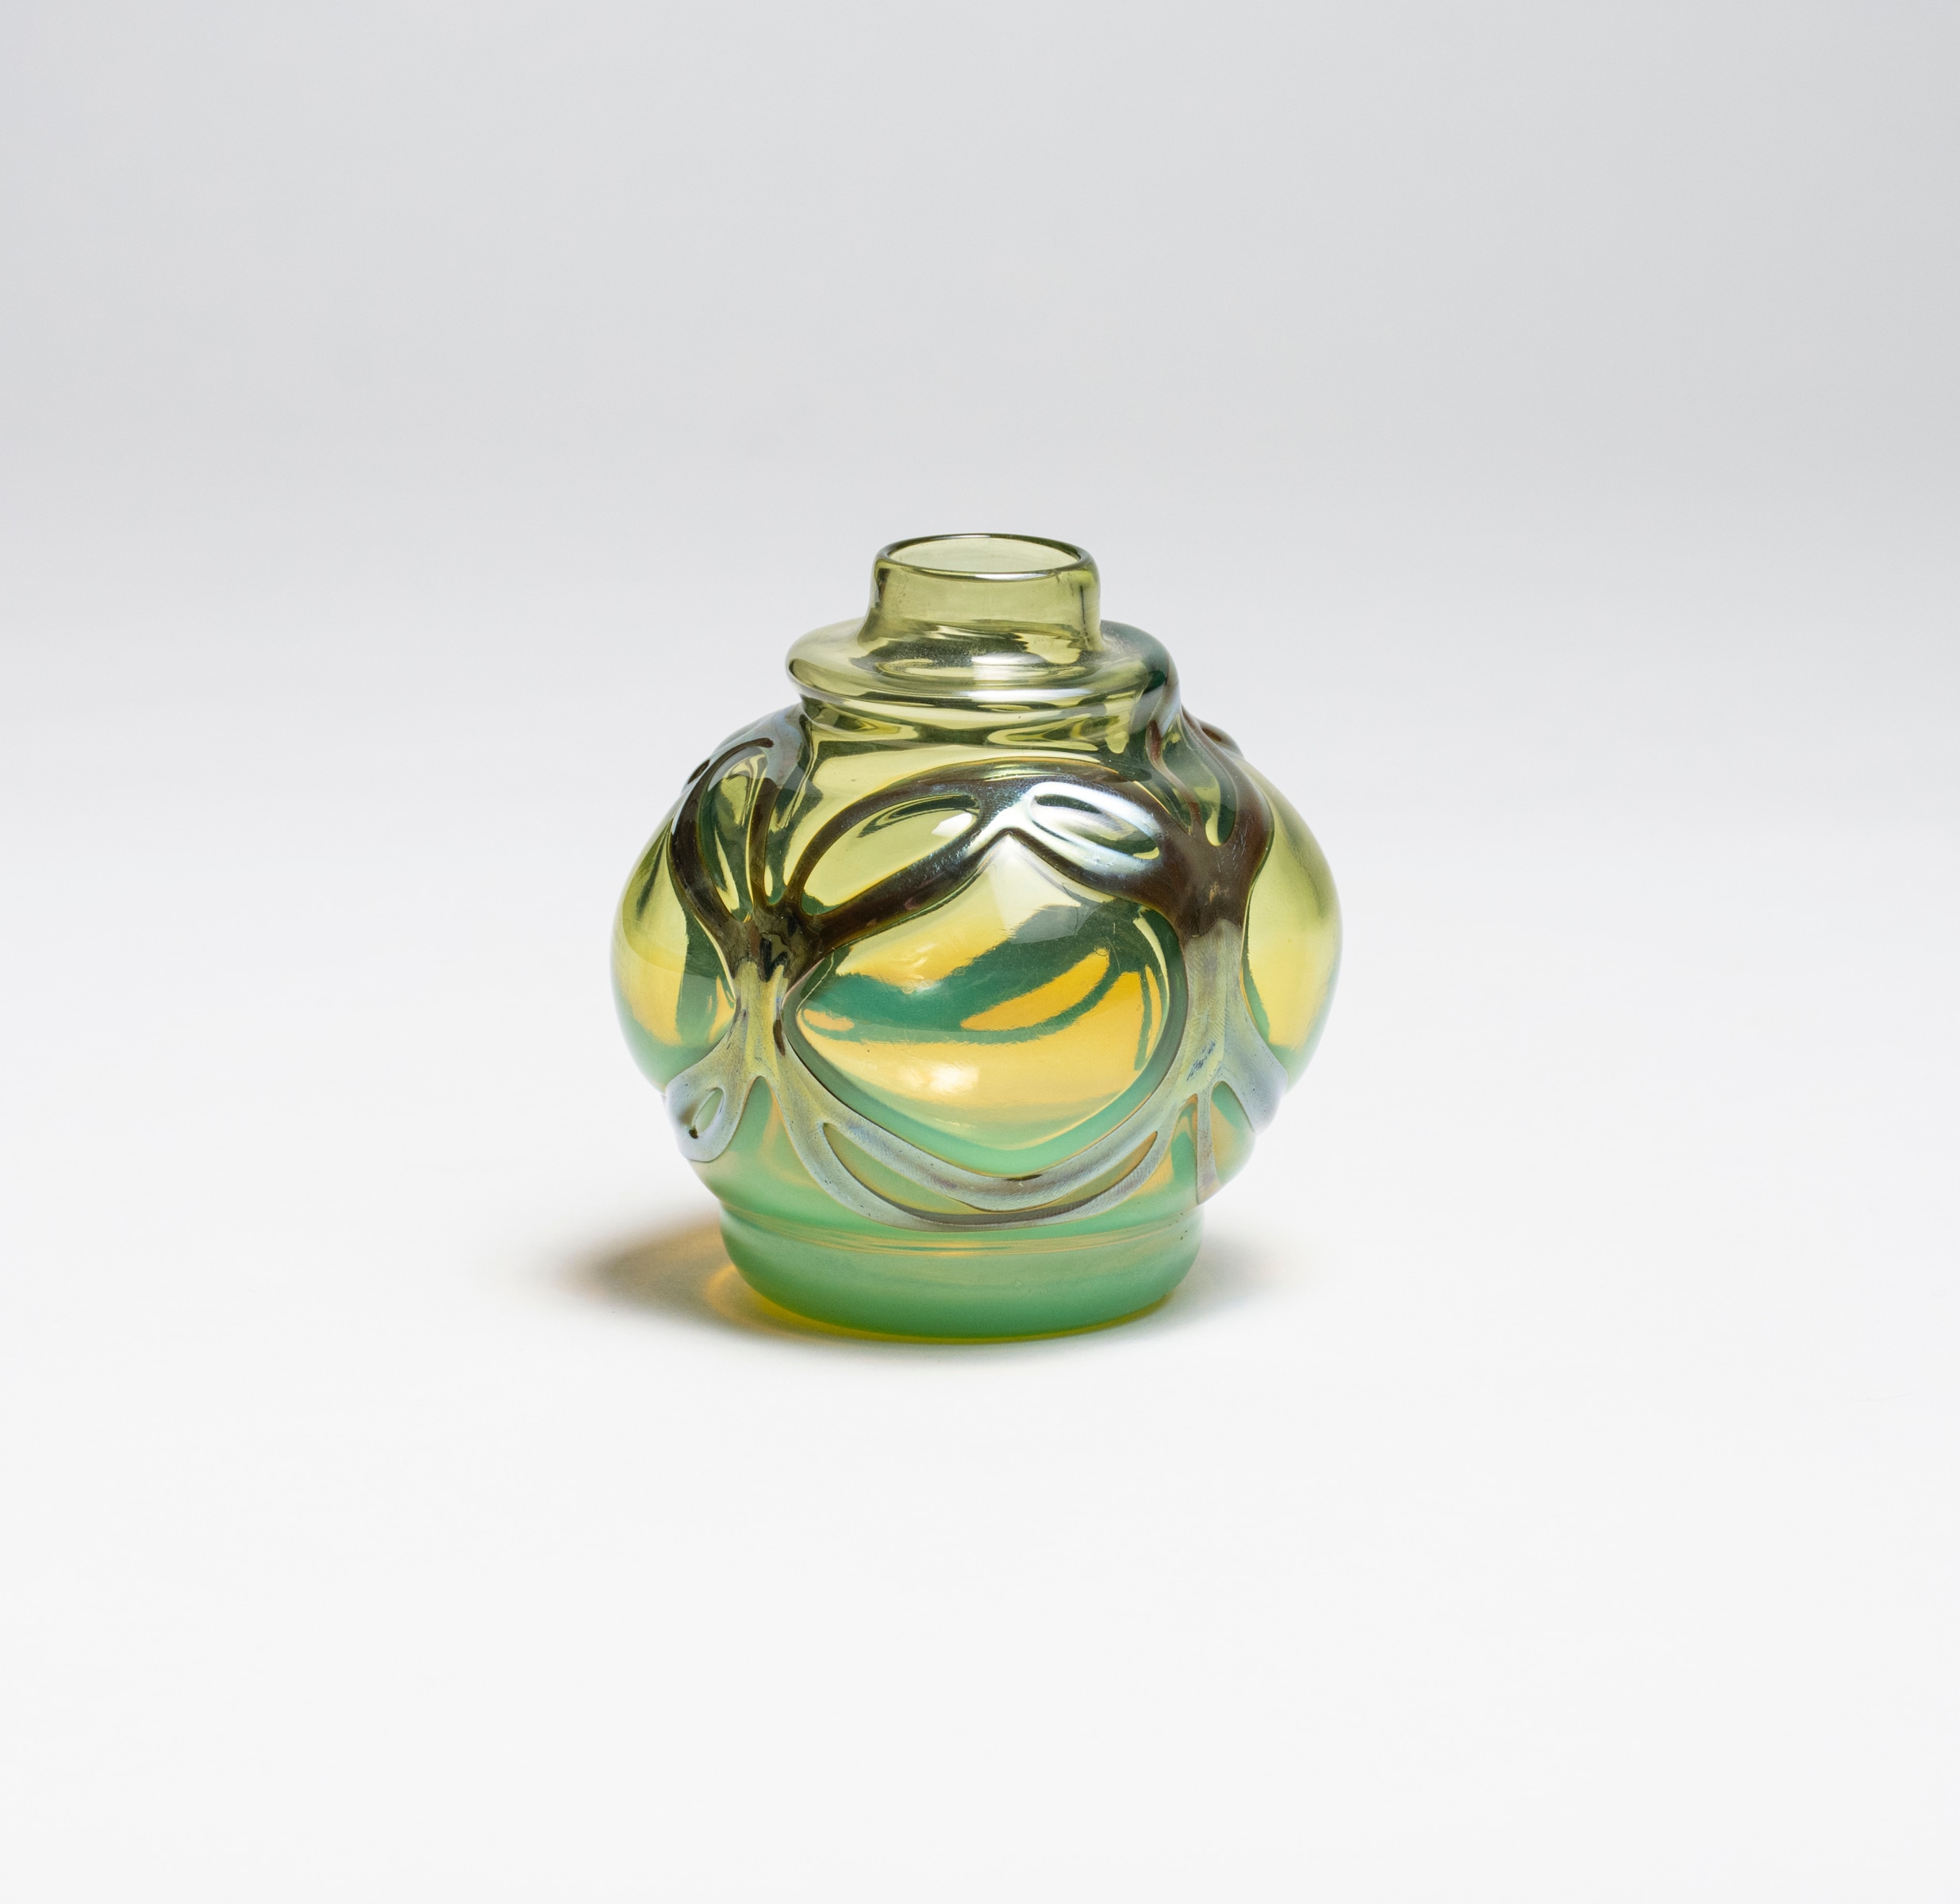 an early piece of blown tiffany favrile glass, a smallish cabinet vase in a slightly neon yellow-ish green tone, with a different layer of silvery glass applied to the surface as if metalwork.